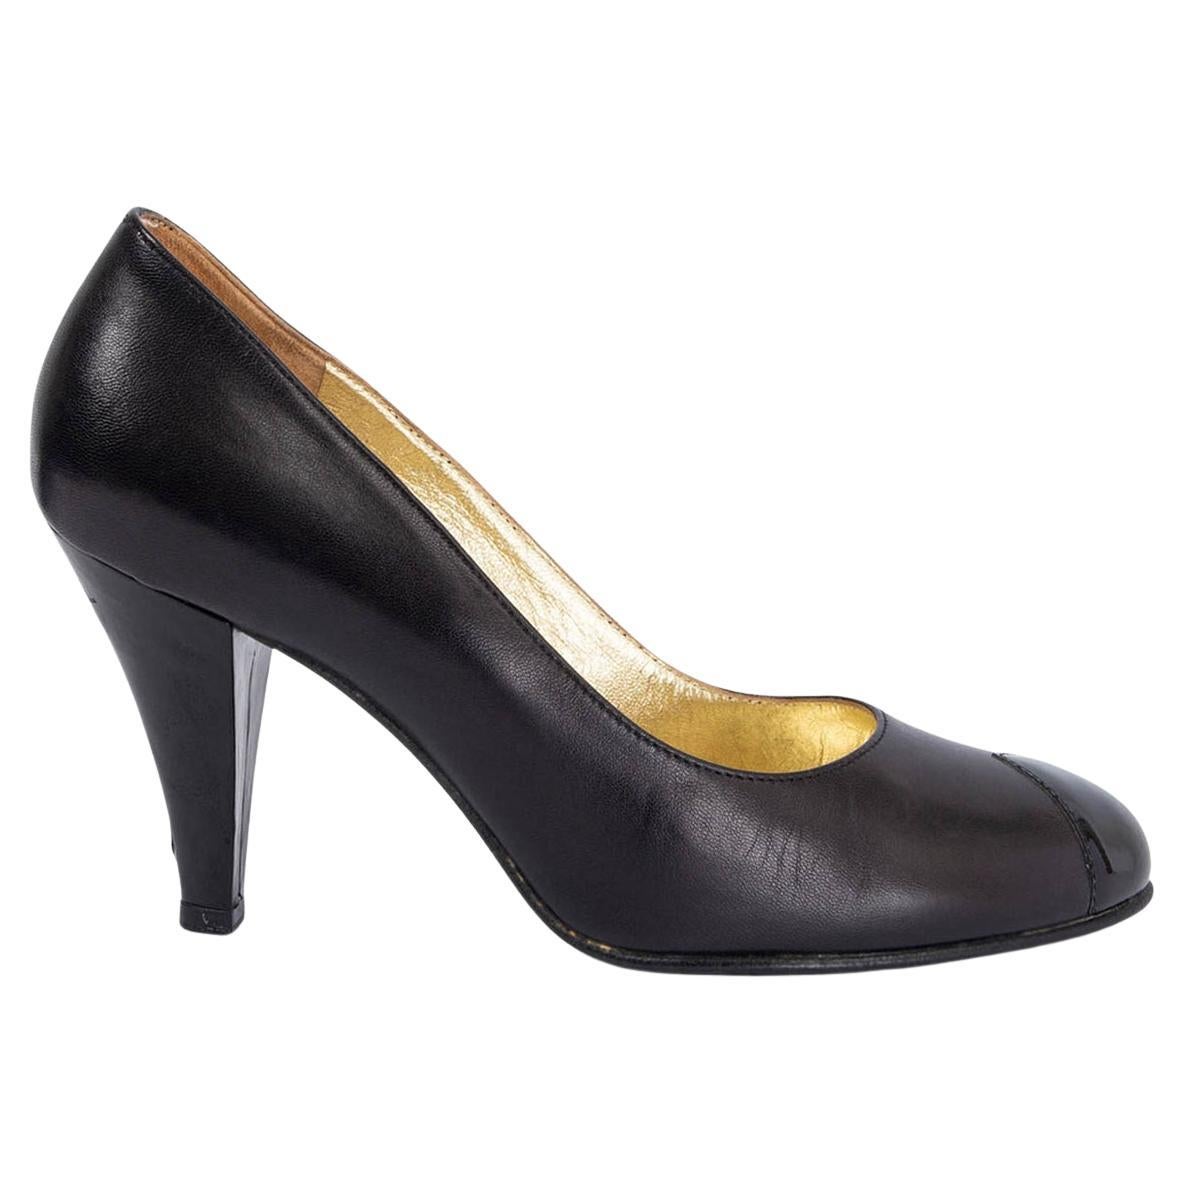 Chanel Black Leather & Patent Round Toe Pumps Shoes 36